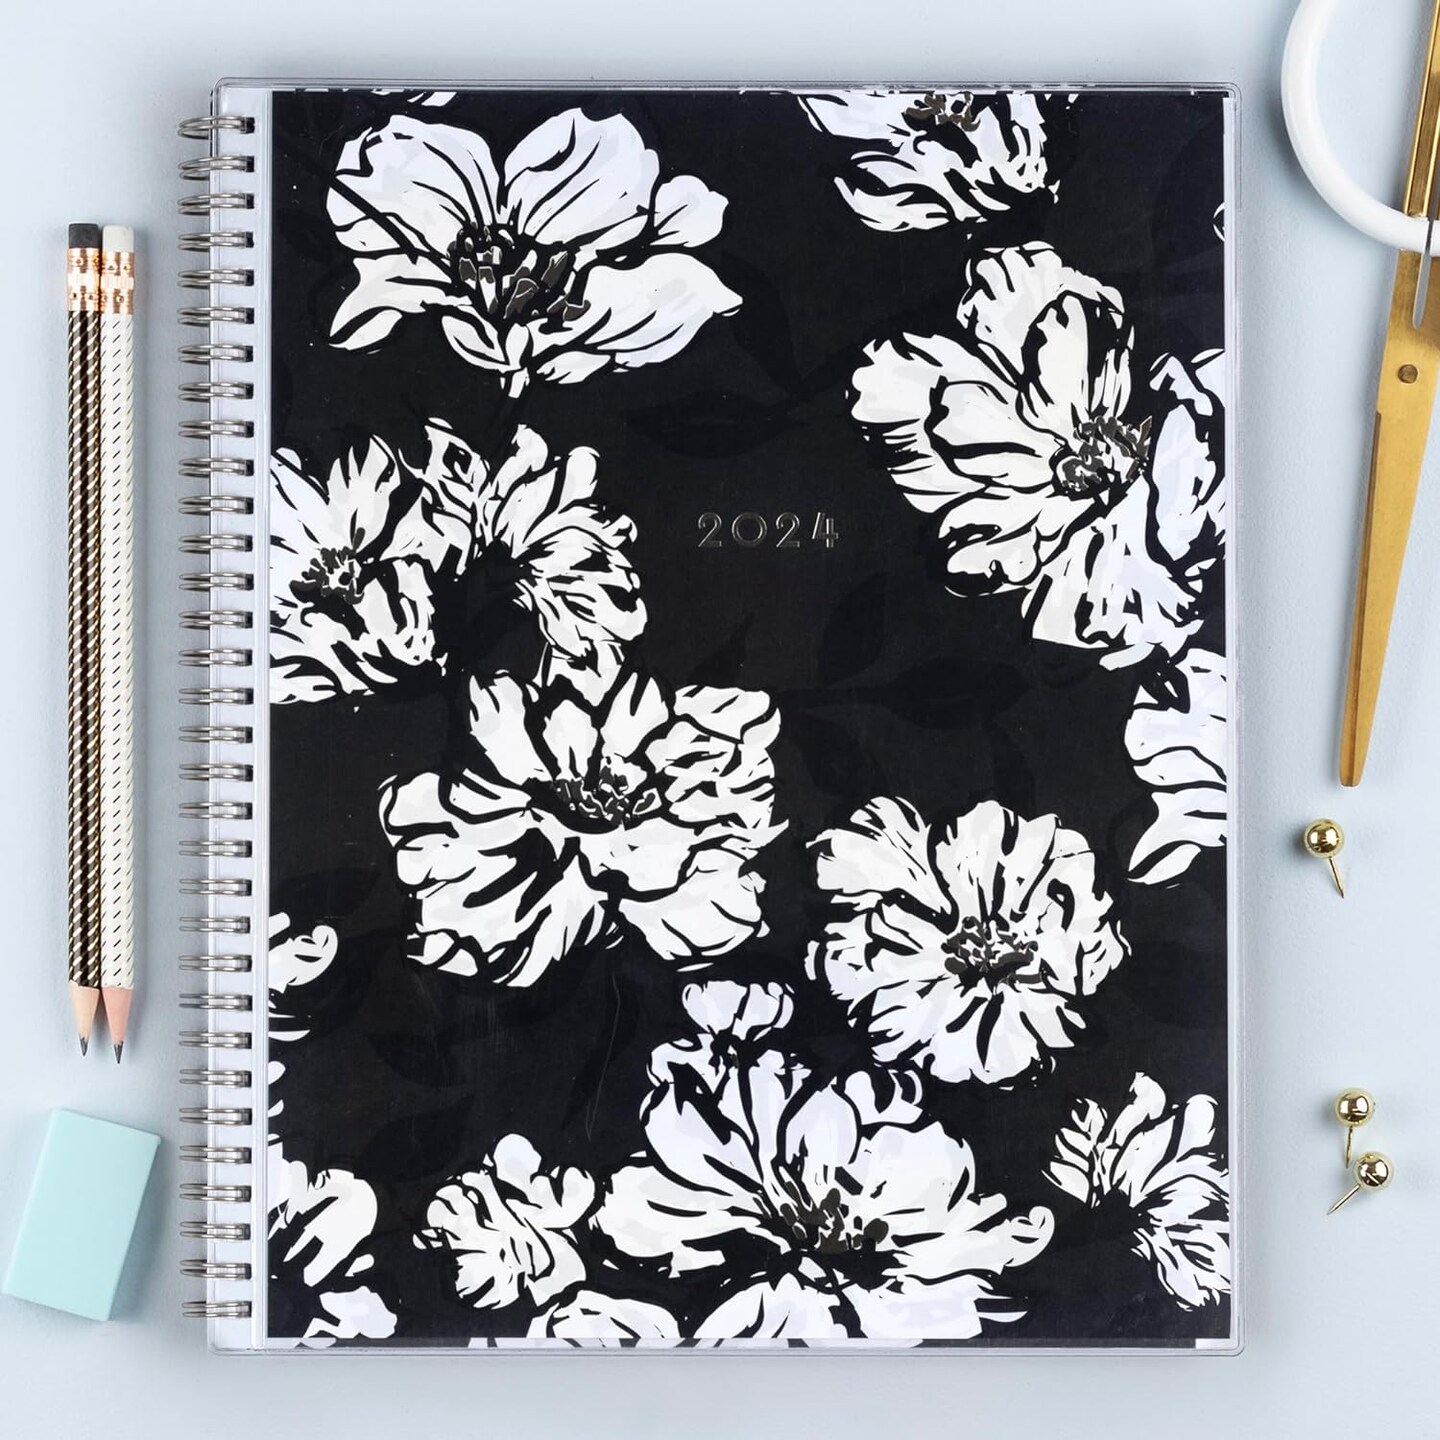 Clear Pocket Cover Planner